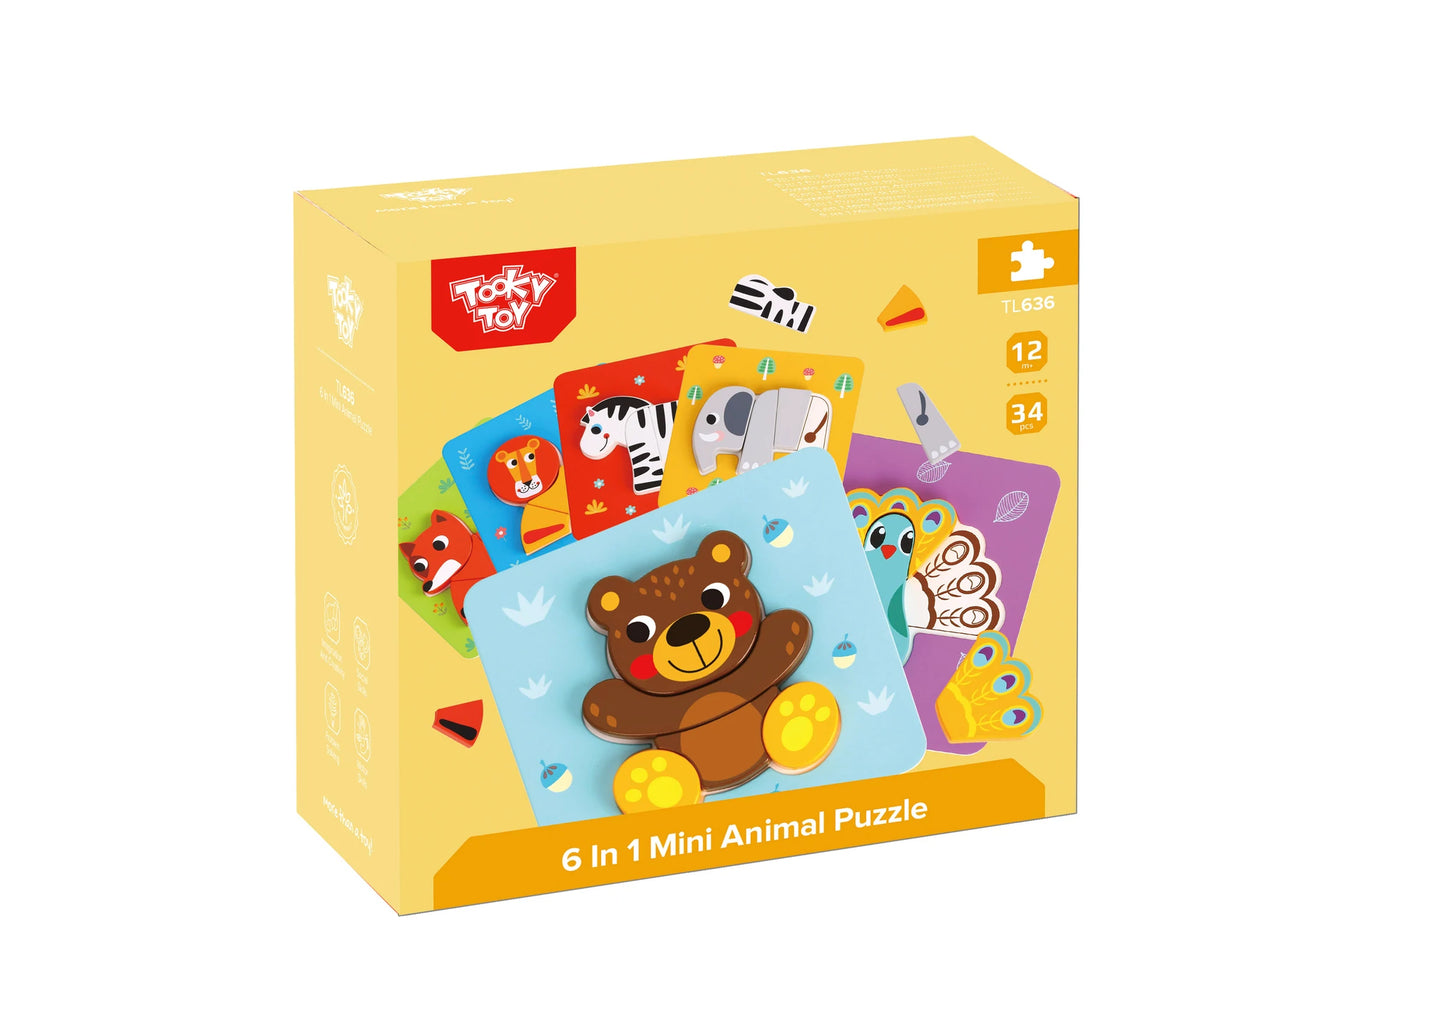 6 In 1 Mini Puzzles - Tooky Toy